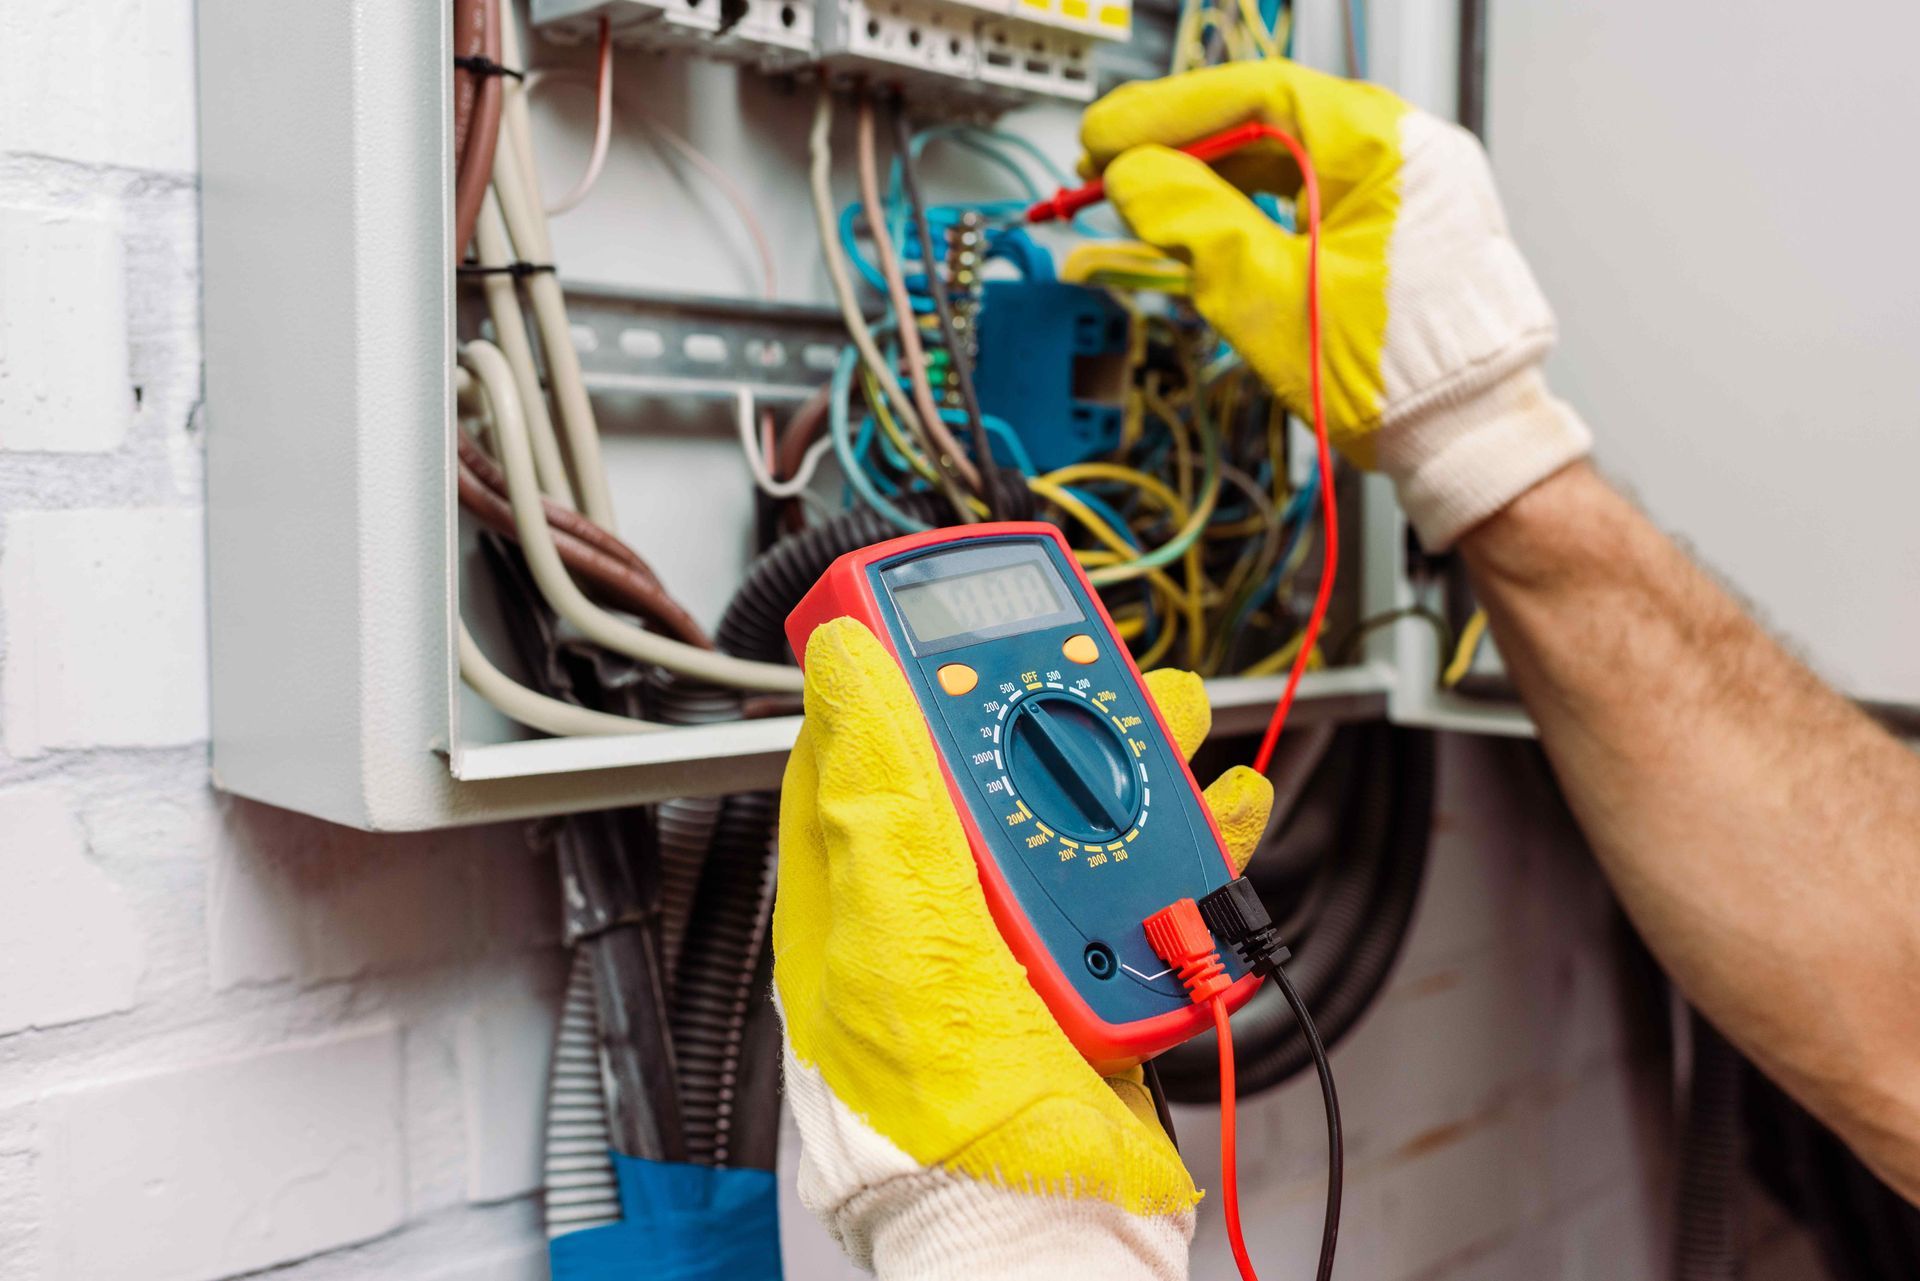 Electrician Using Multimeter to Check Status of Circuit Breaker In Electrical Panel